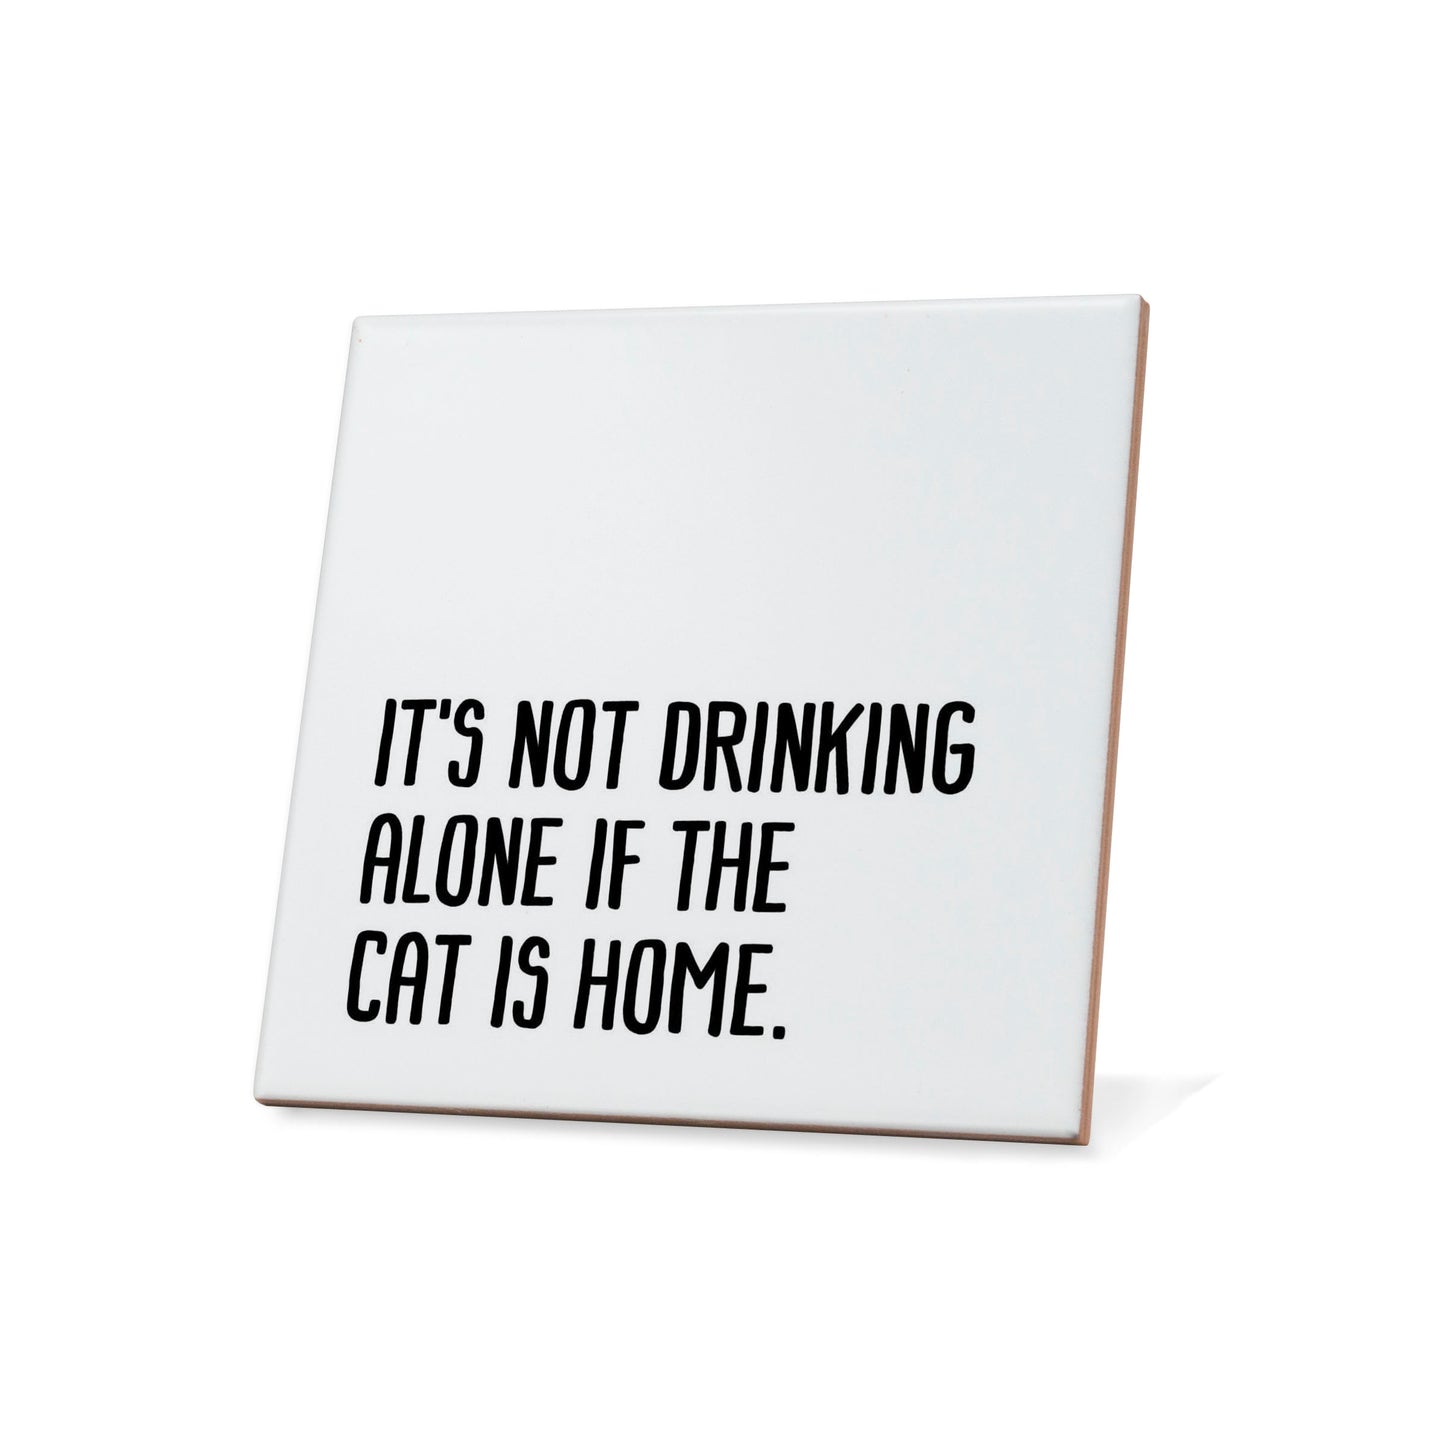 It's not drinking alone if the cat is here Quote Coaster